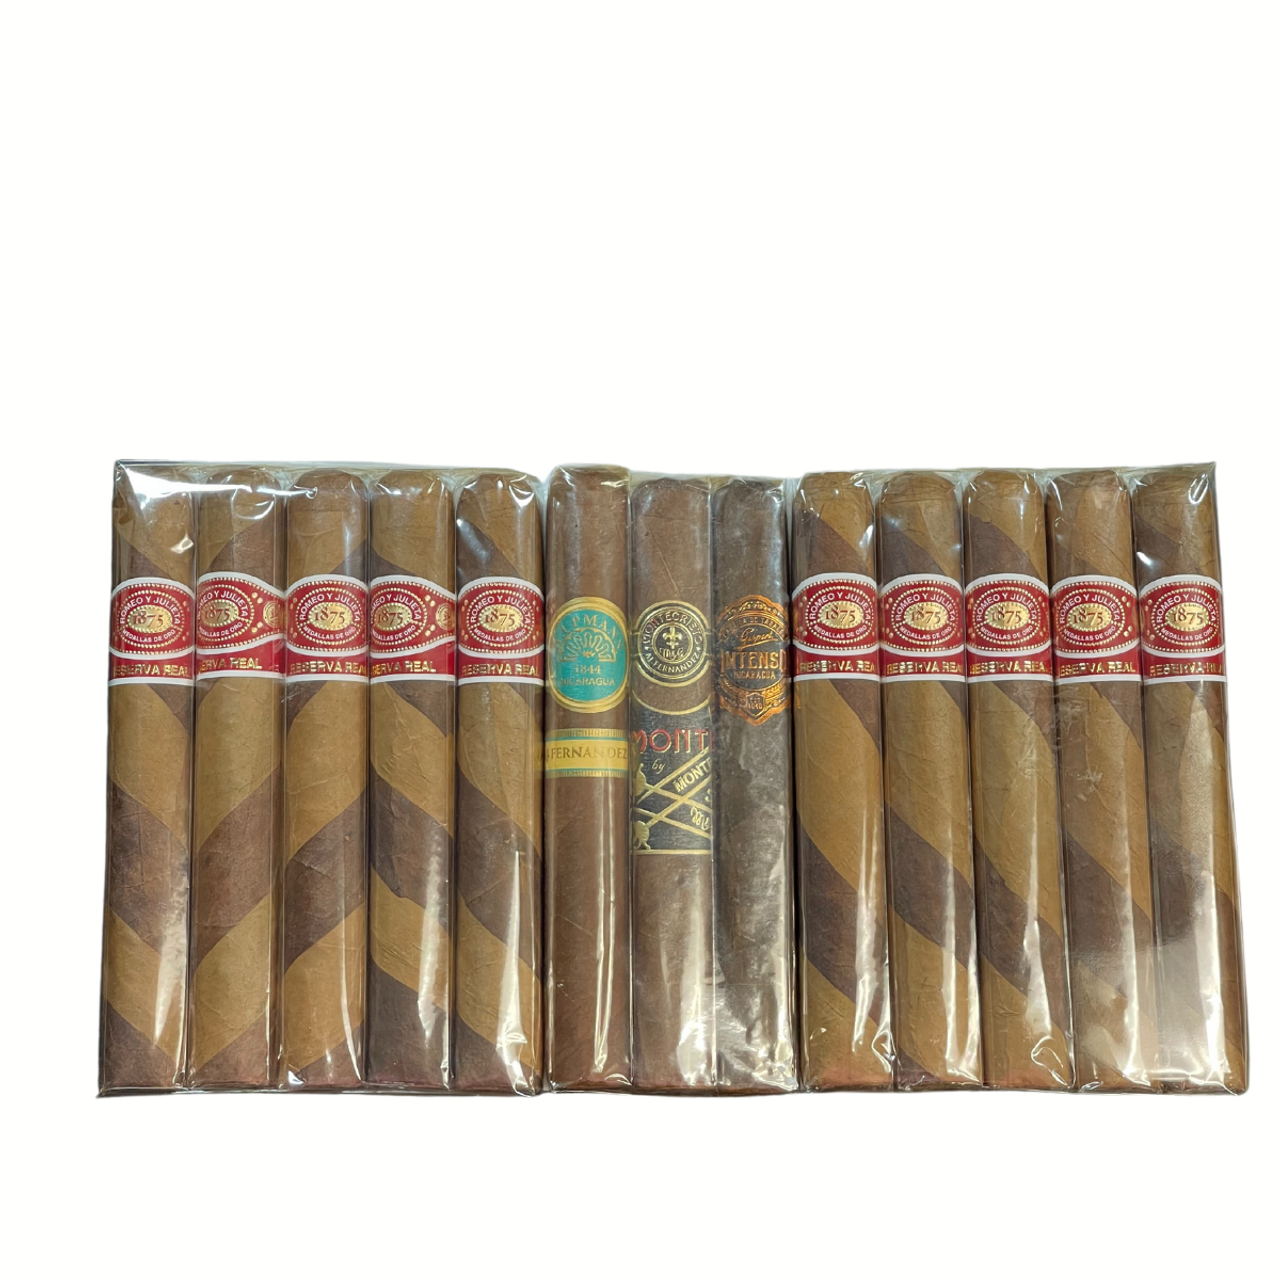 Romeo Y Julieta Reserva Real Twisted Toro ( 6 X 54 ) Barber Pole 10 pack with AJ Fernandez Bonus pack. 13 Toro shaped cigars shipped for FREE. Cigarsamplers.com is on fire!!!